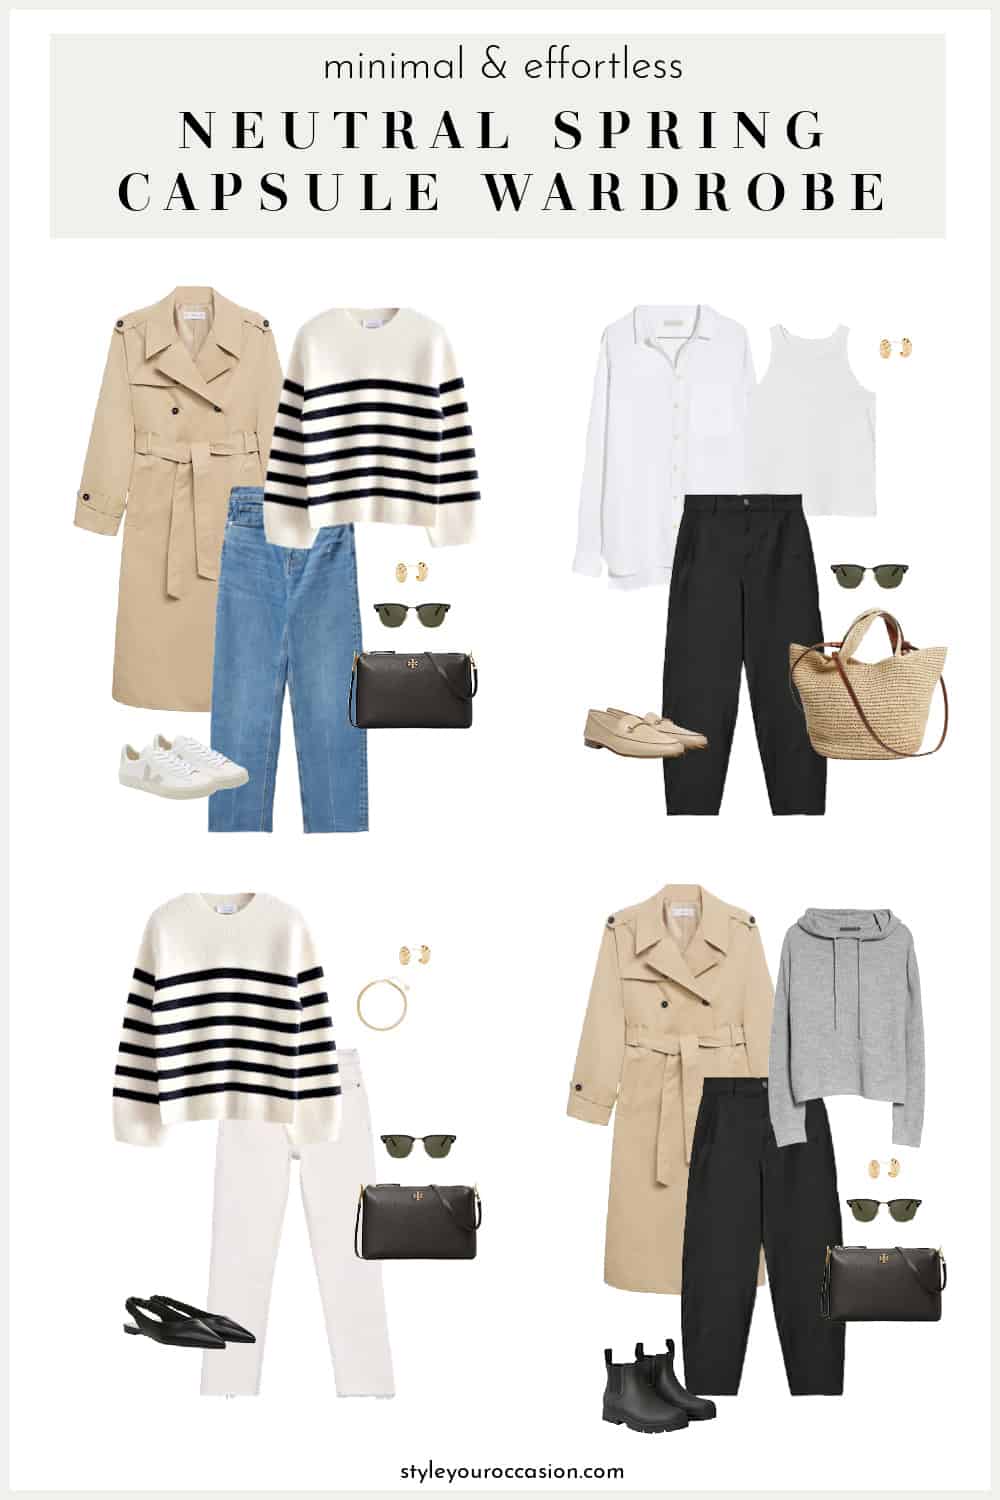 Collage of neutral spring clothing and accessories